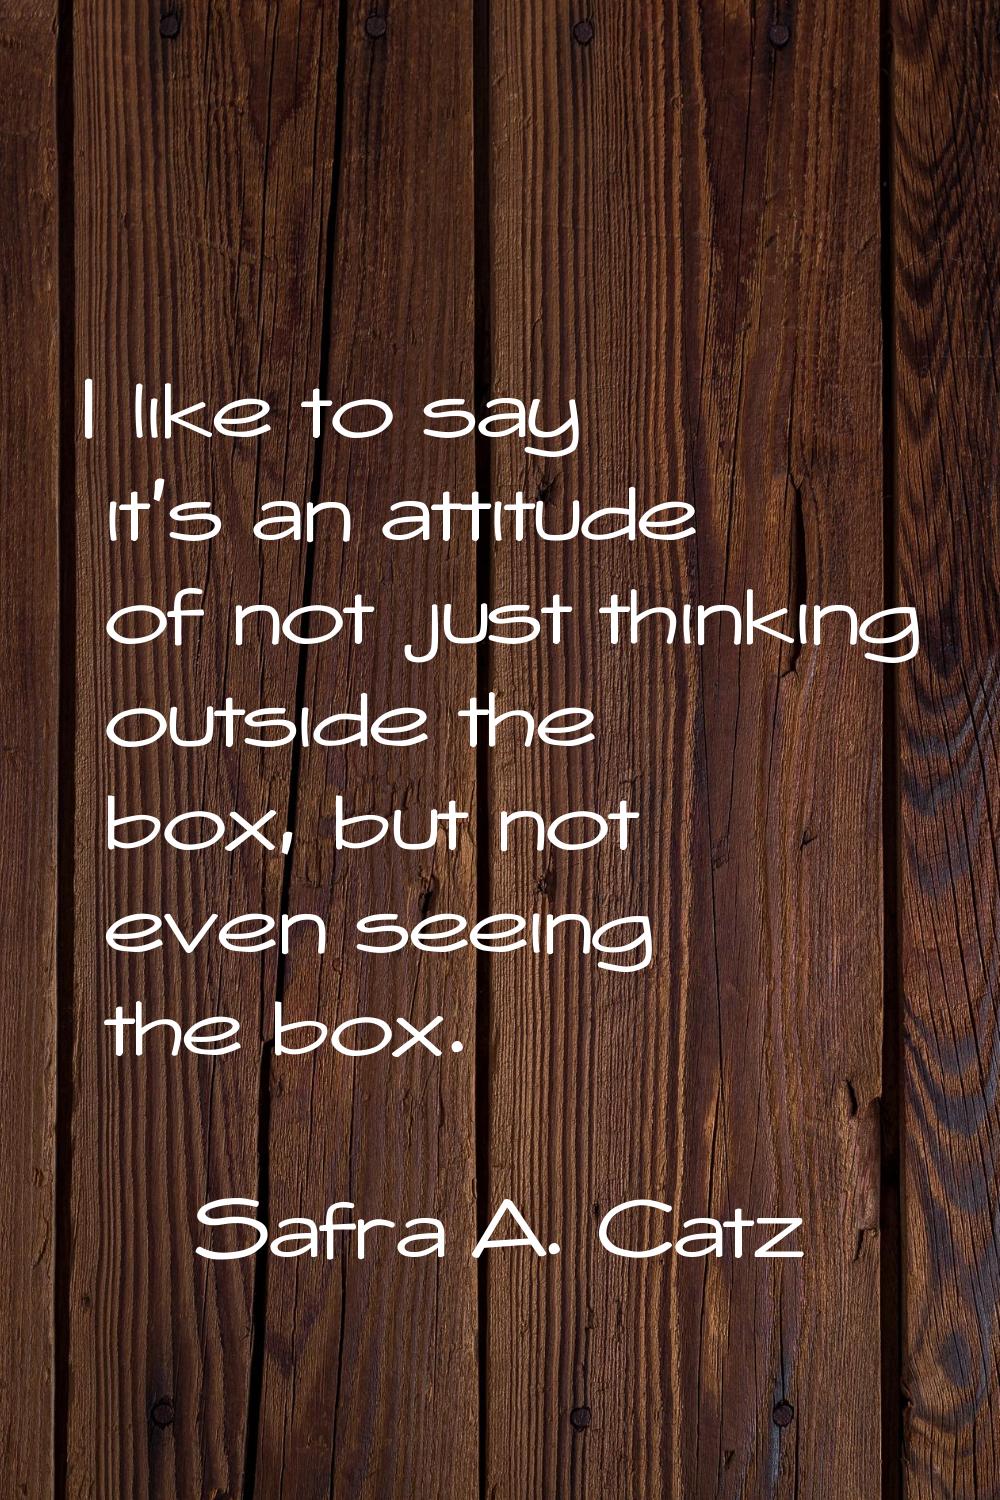 I like to say it's an attitude of not just thinking outside the box, but not even seeing the box.